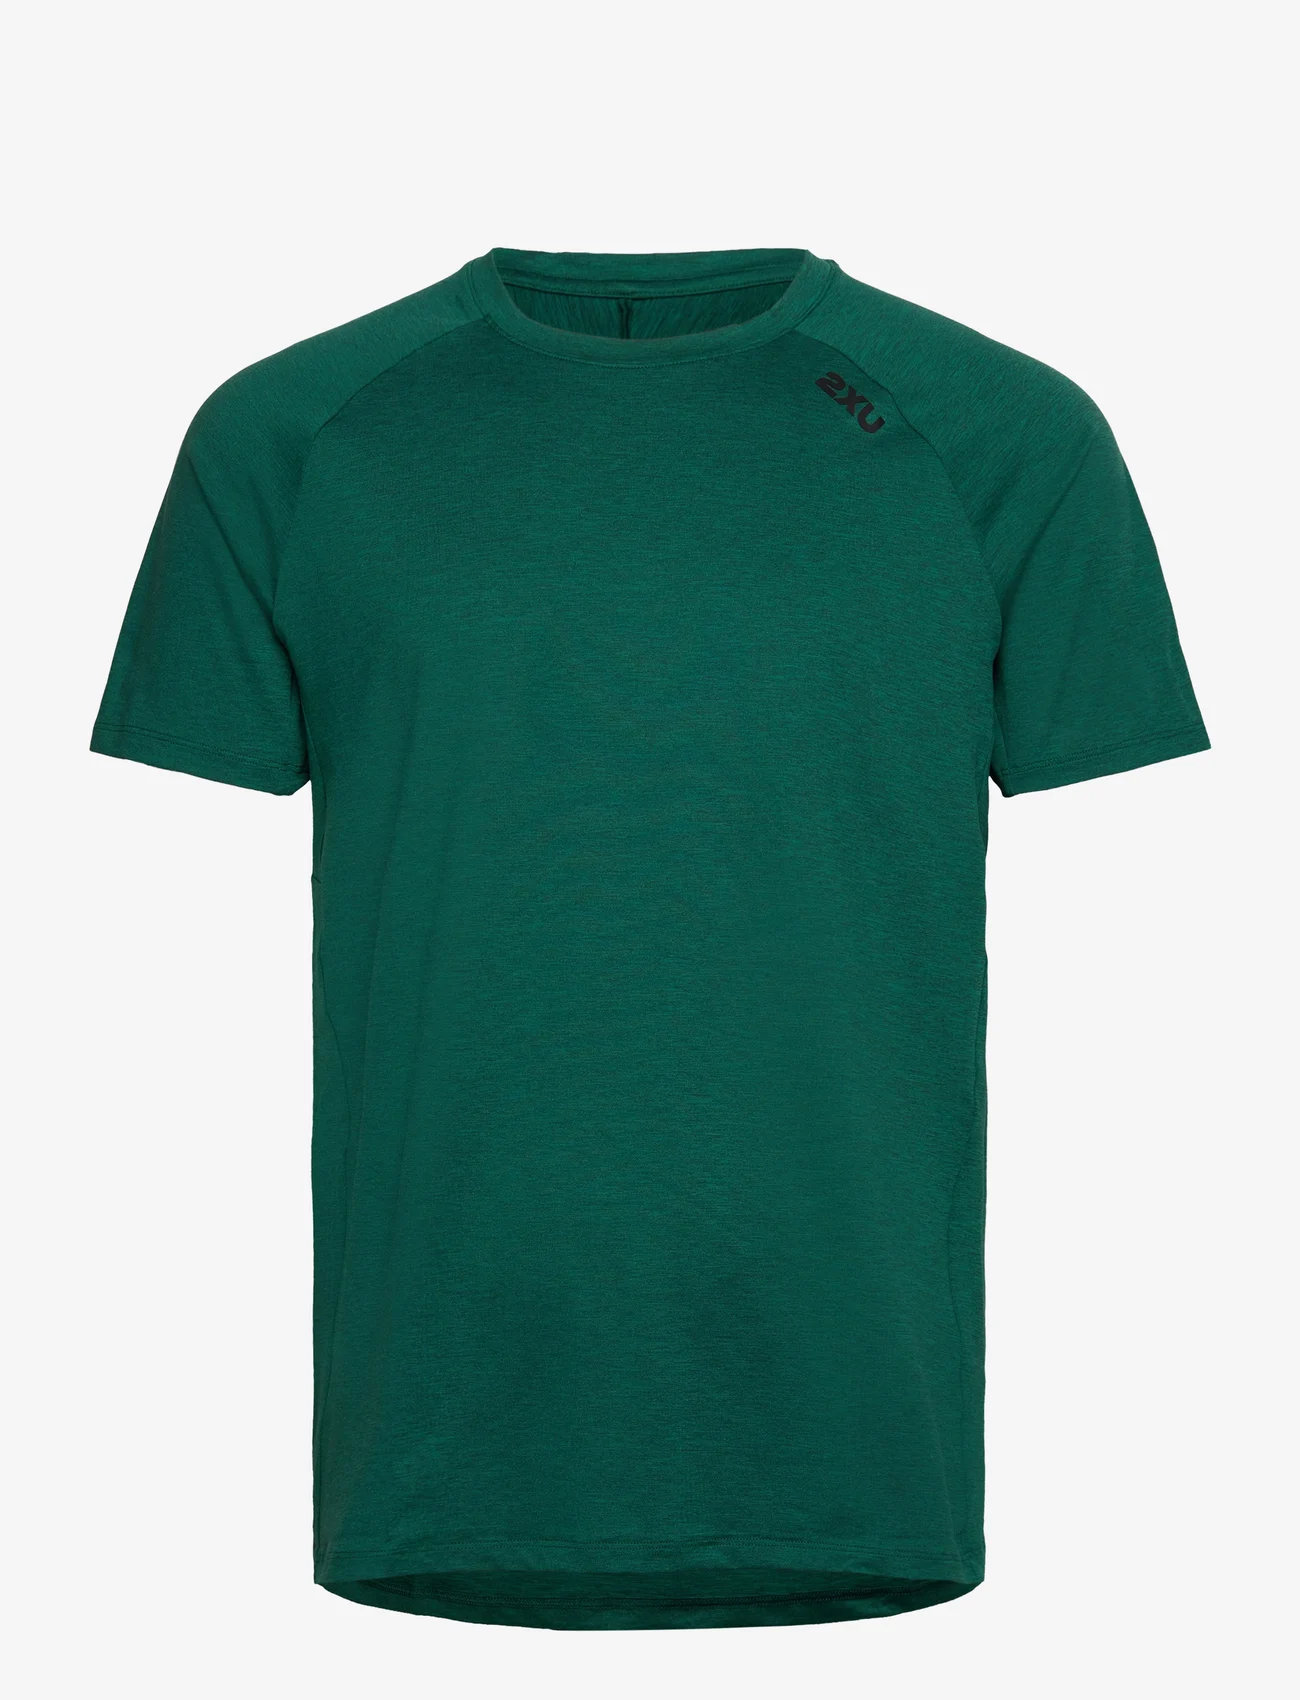 2XU - MOTION TEE - t-shirts - forest green/black - 0